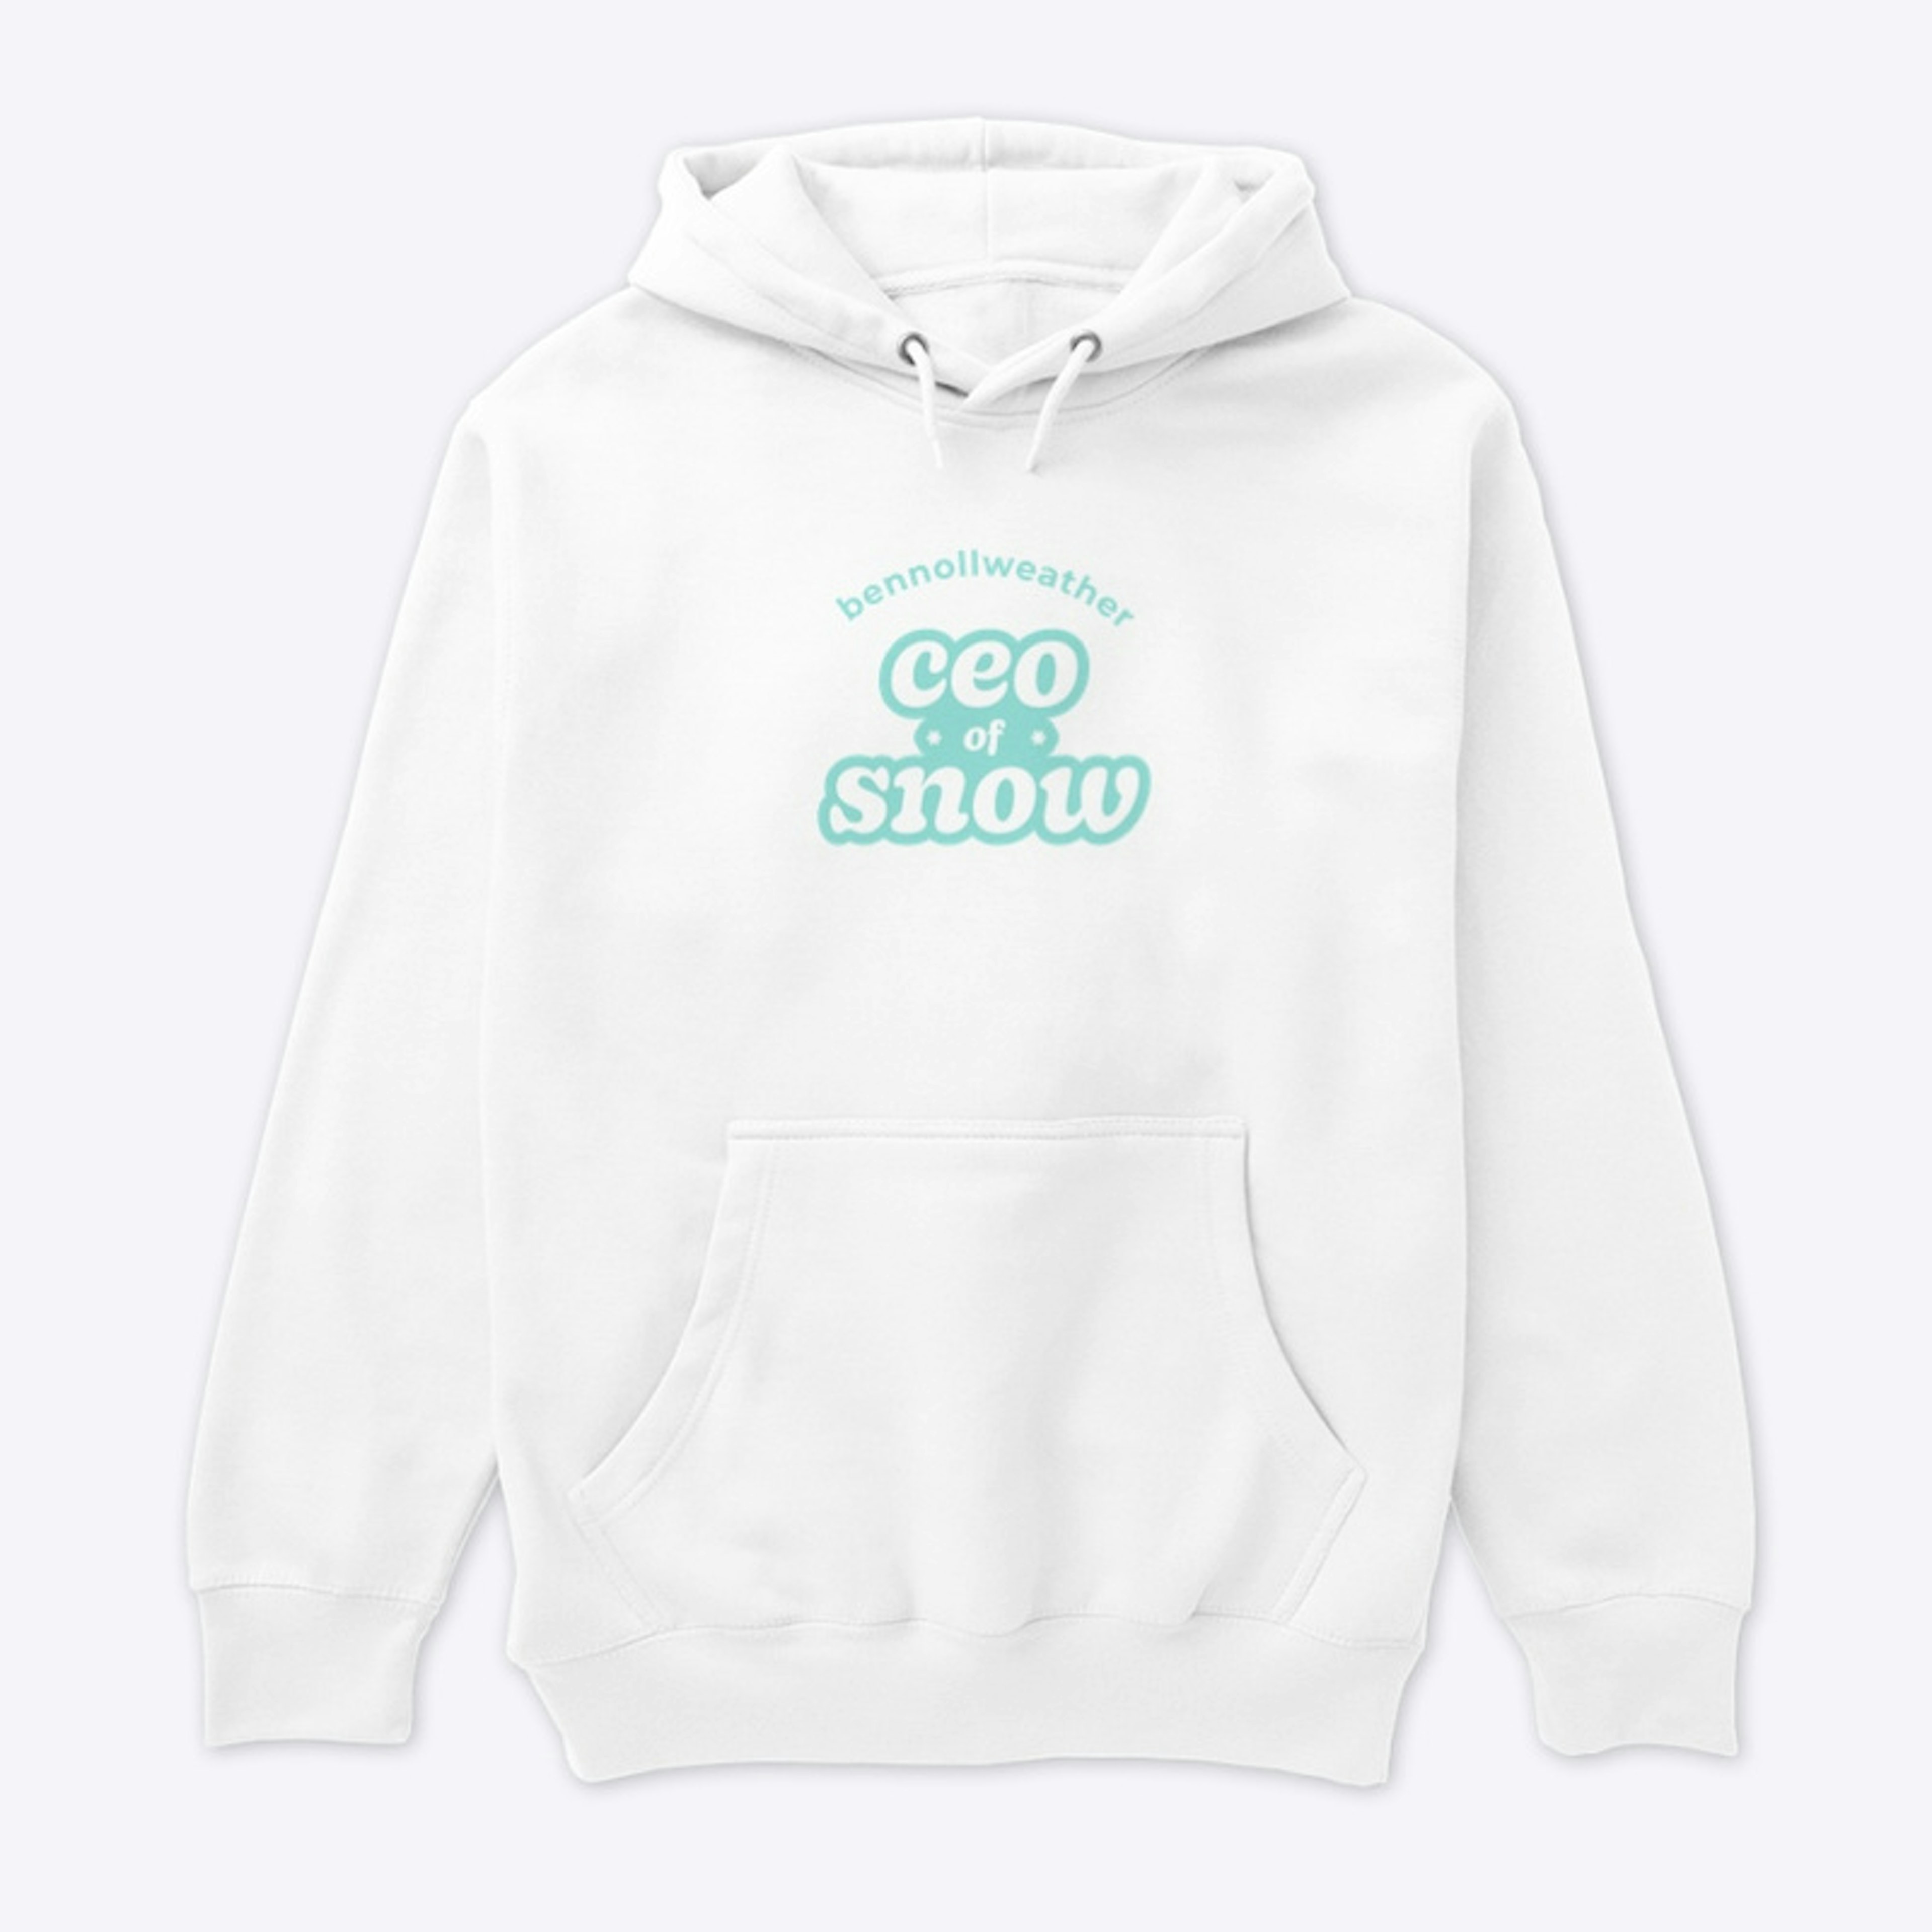 CEO of Snow - Mint Green